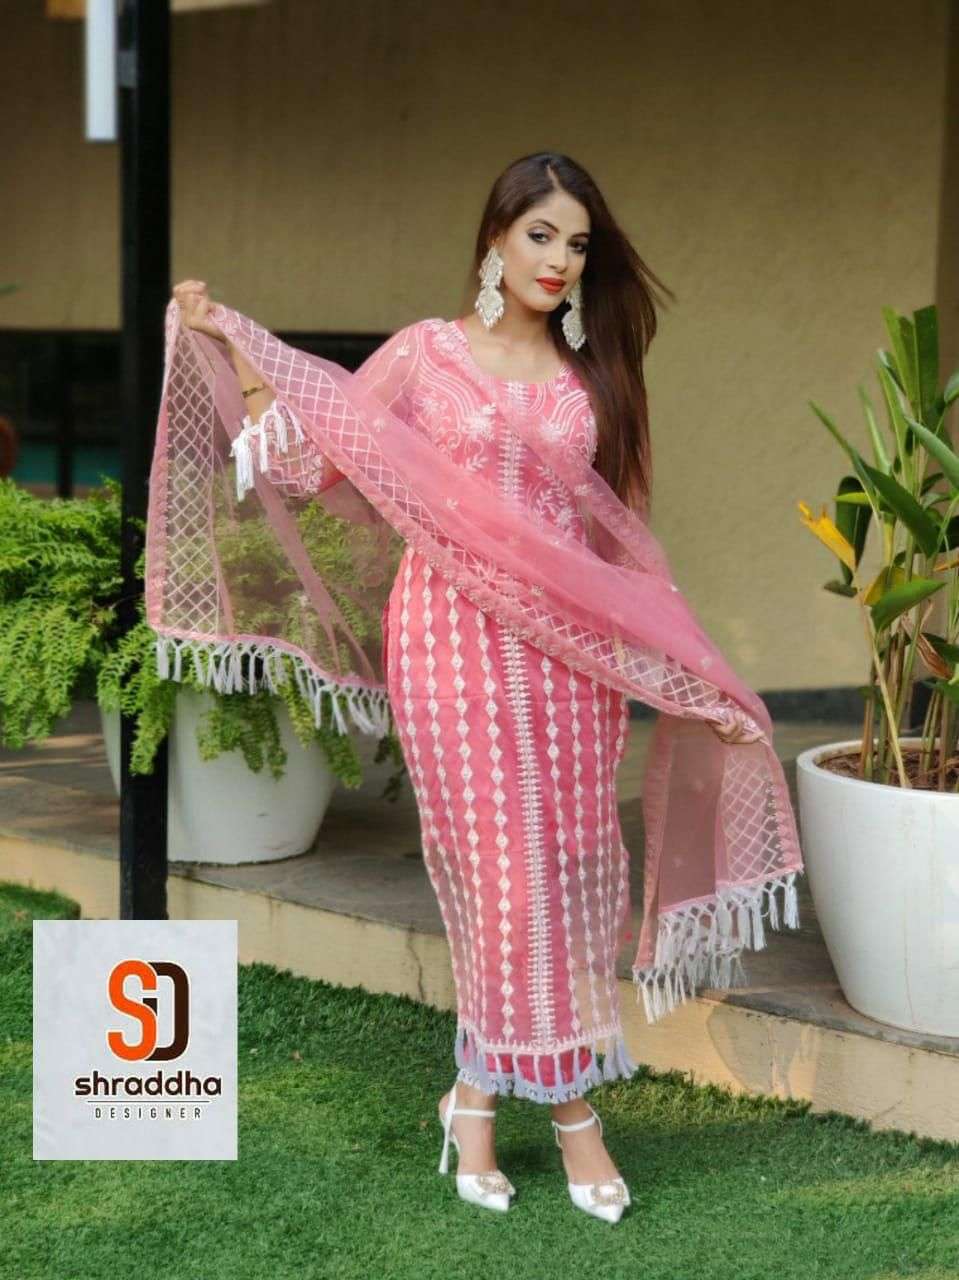 Shraddha Designer SD0011 Butterfly Net with Heavy Embroidery Work Pakistani Dress Material